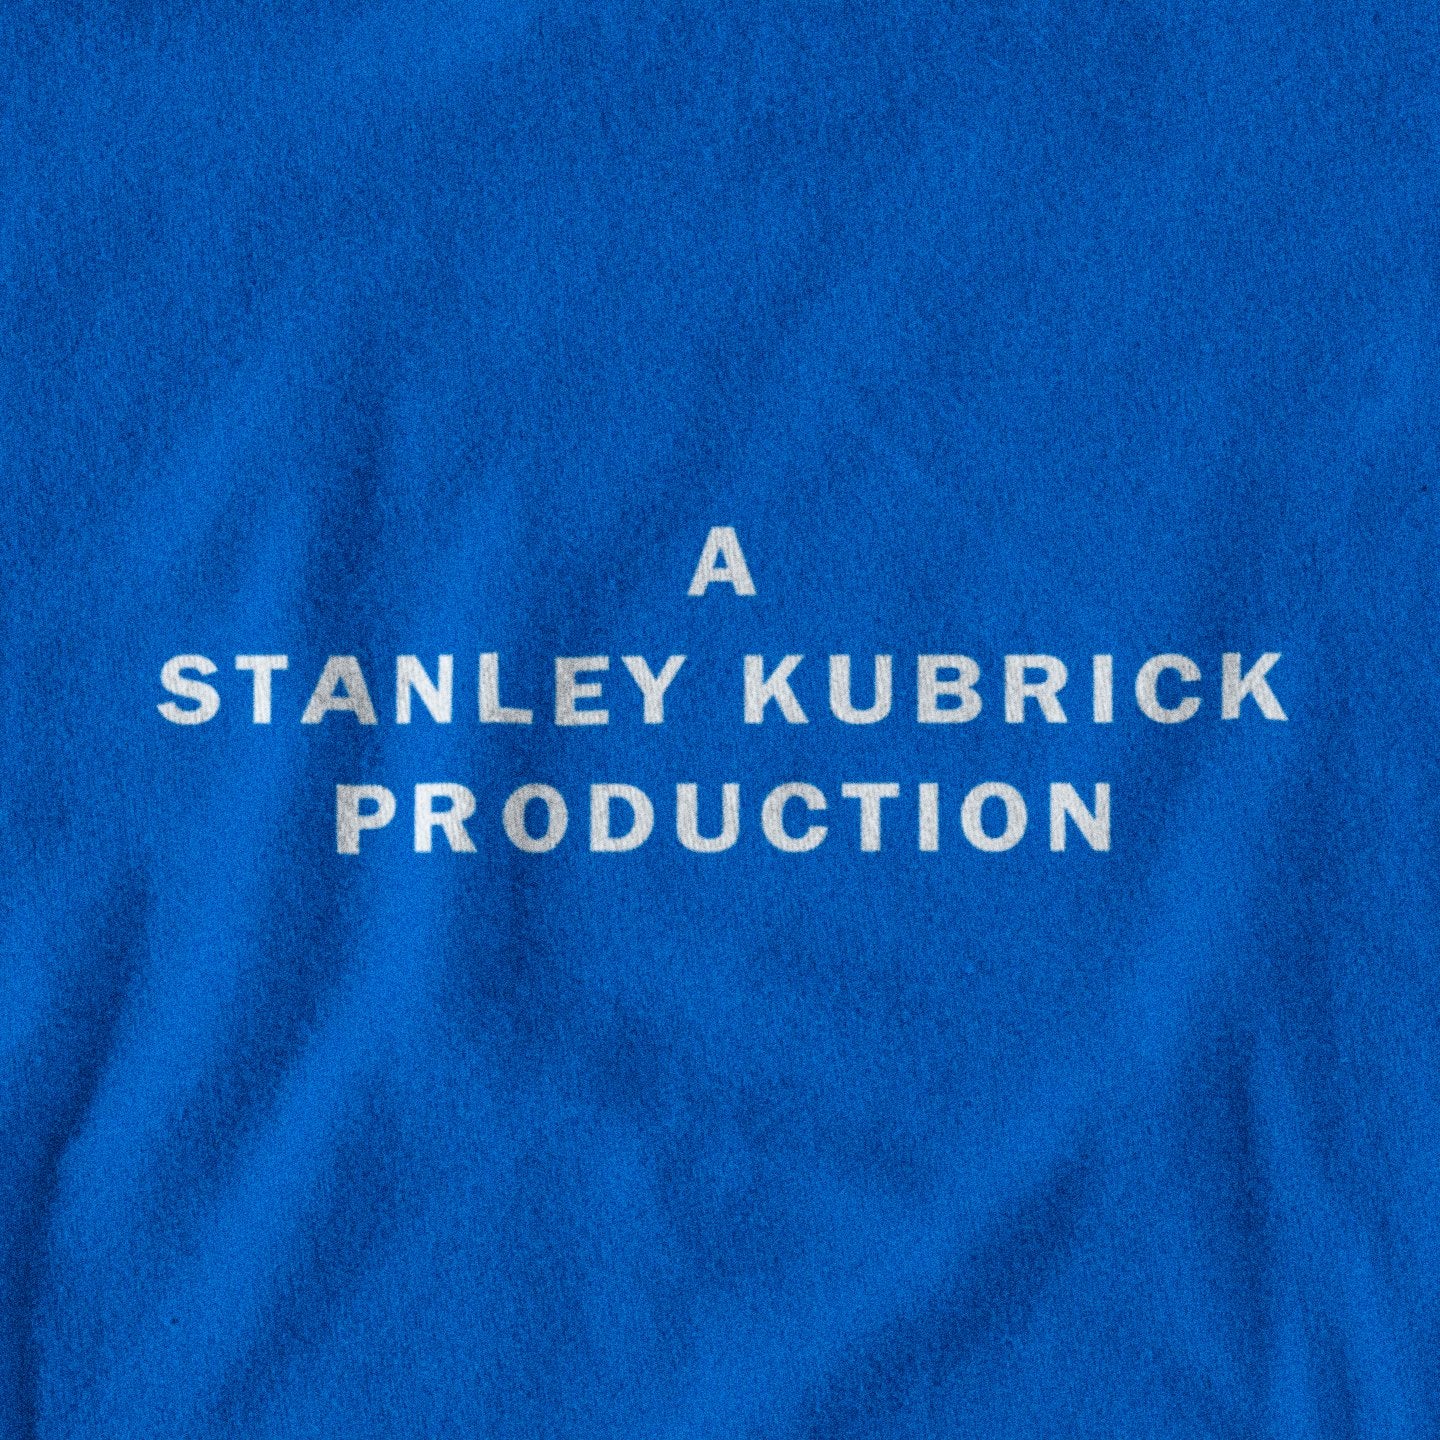 A Stanley Kubrick Production - Hoodie